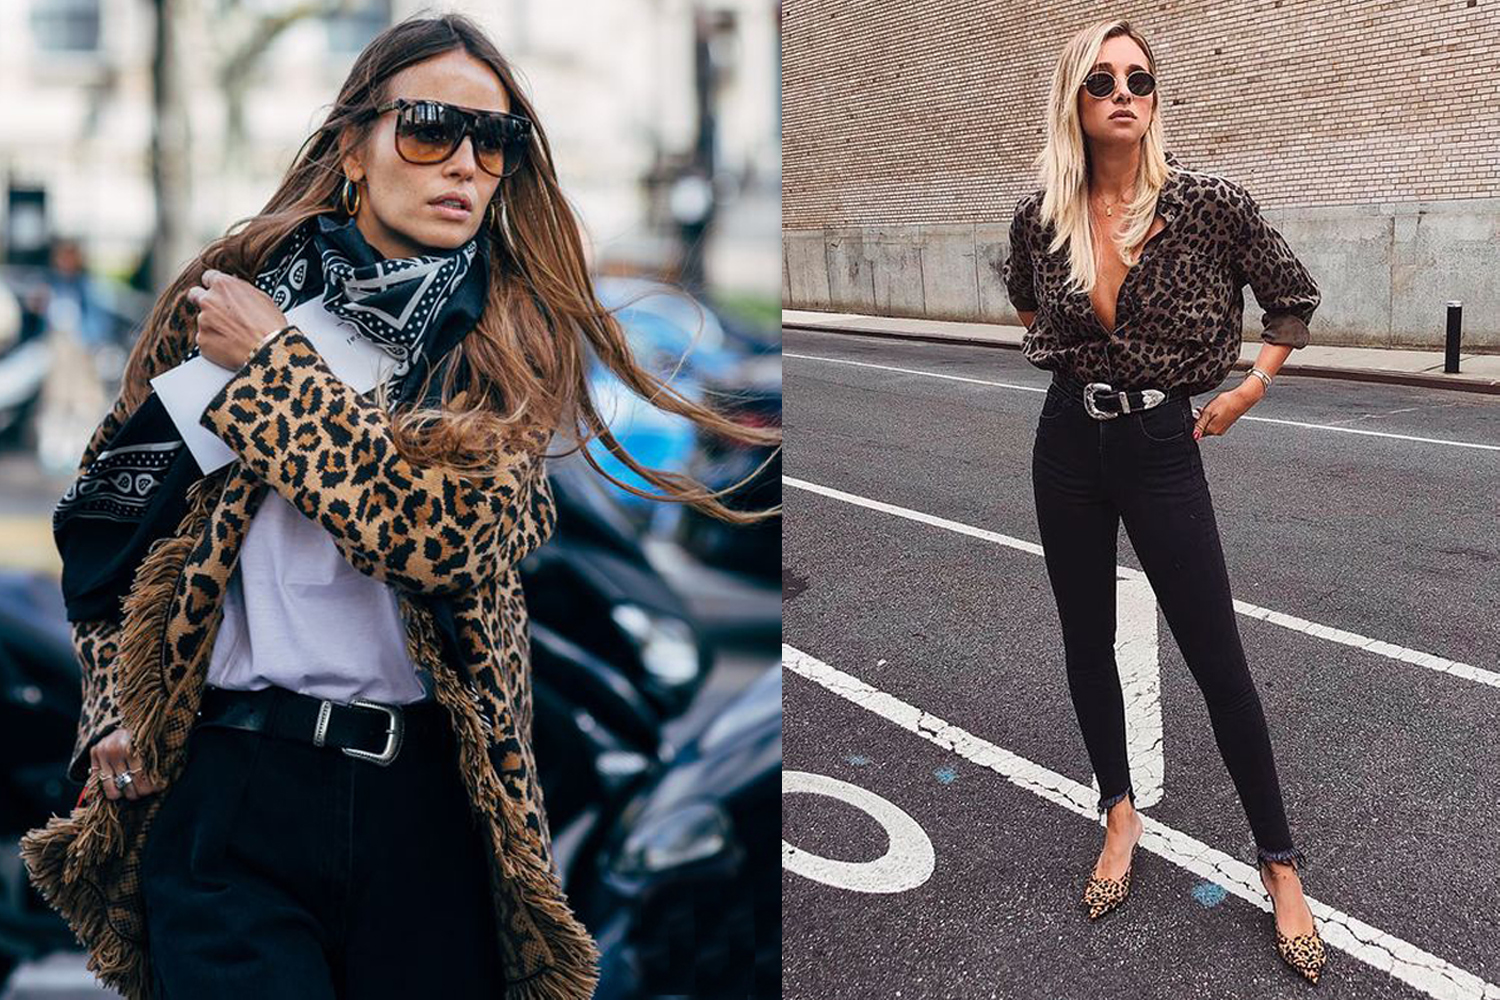 How to Recreate Looks from your Favorite Fashion Influencers